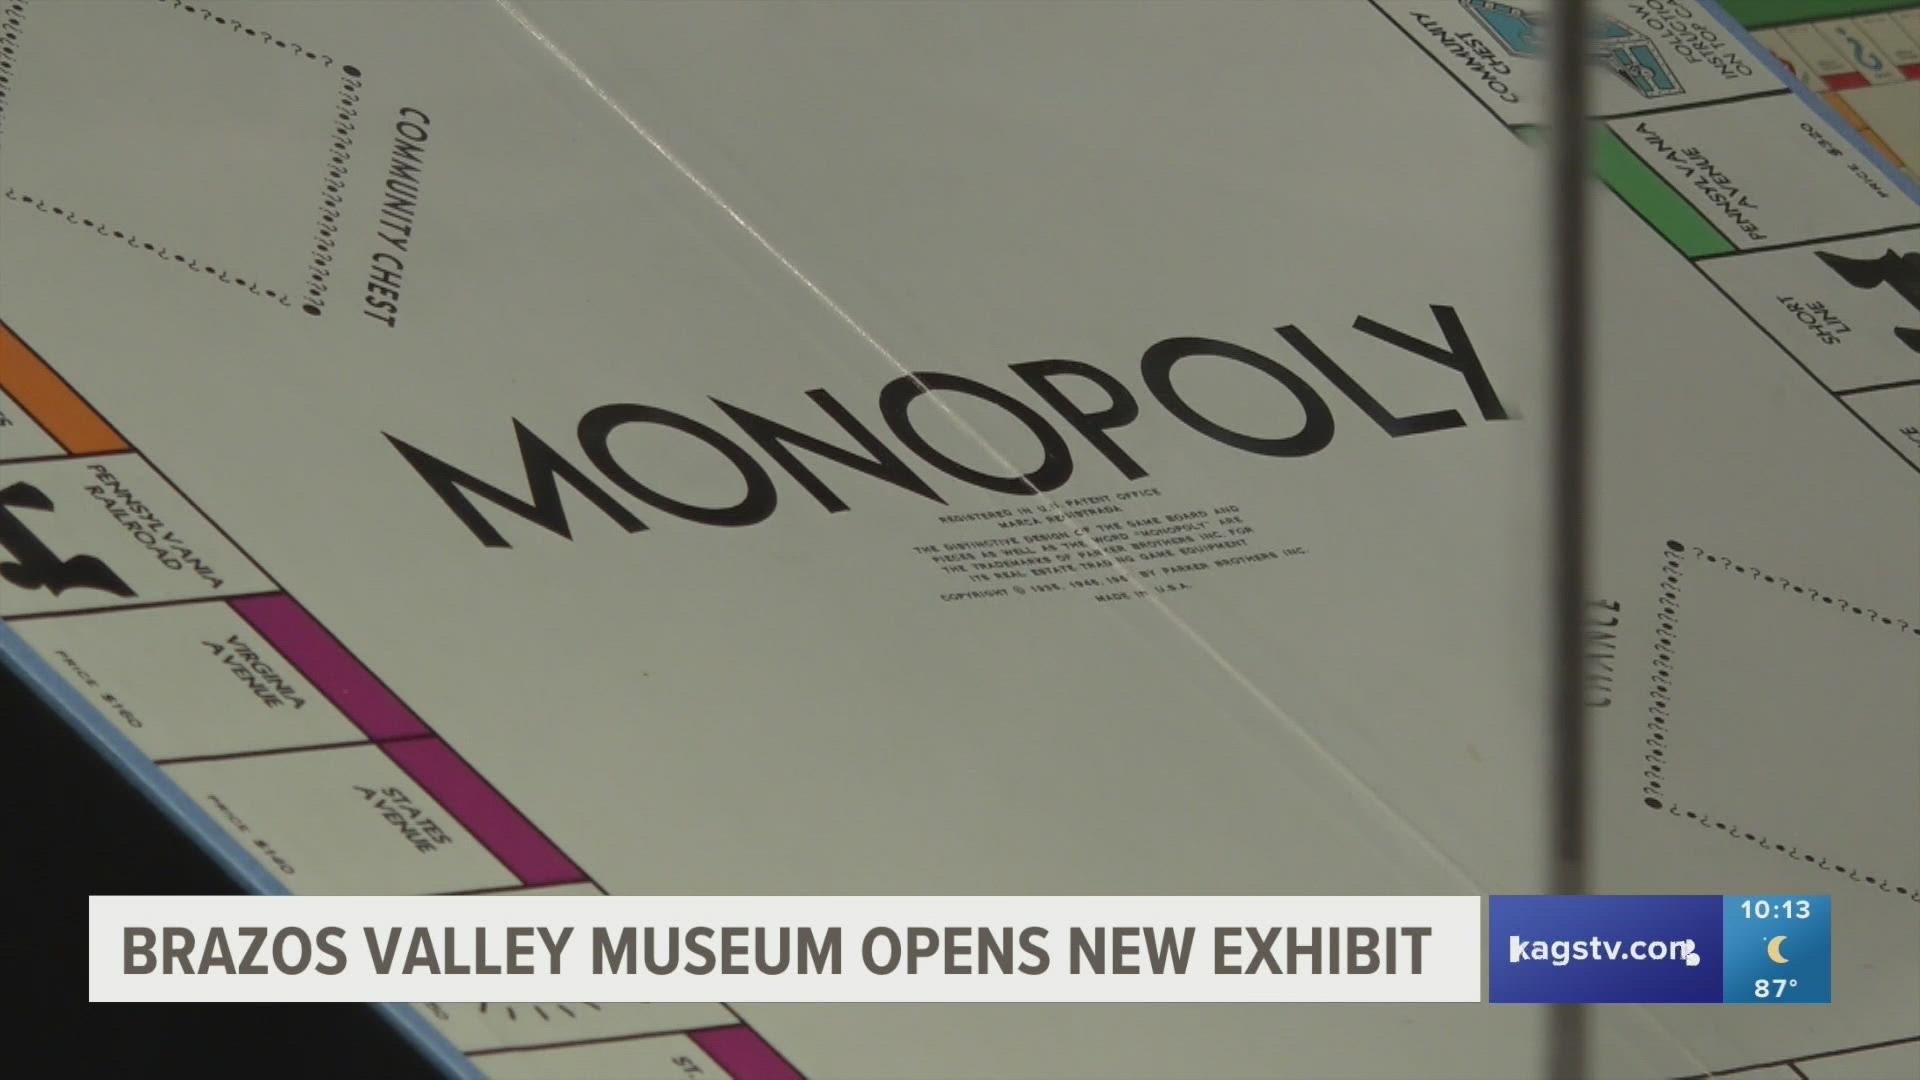 KAGS's William Johnson visits the Brazos Valley Museum to learn more about their new exhibit.